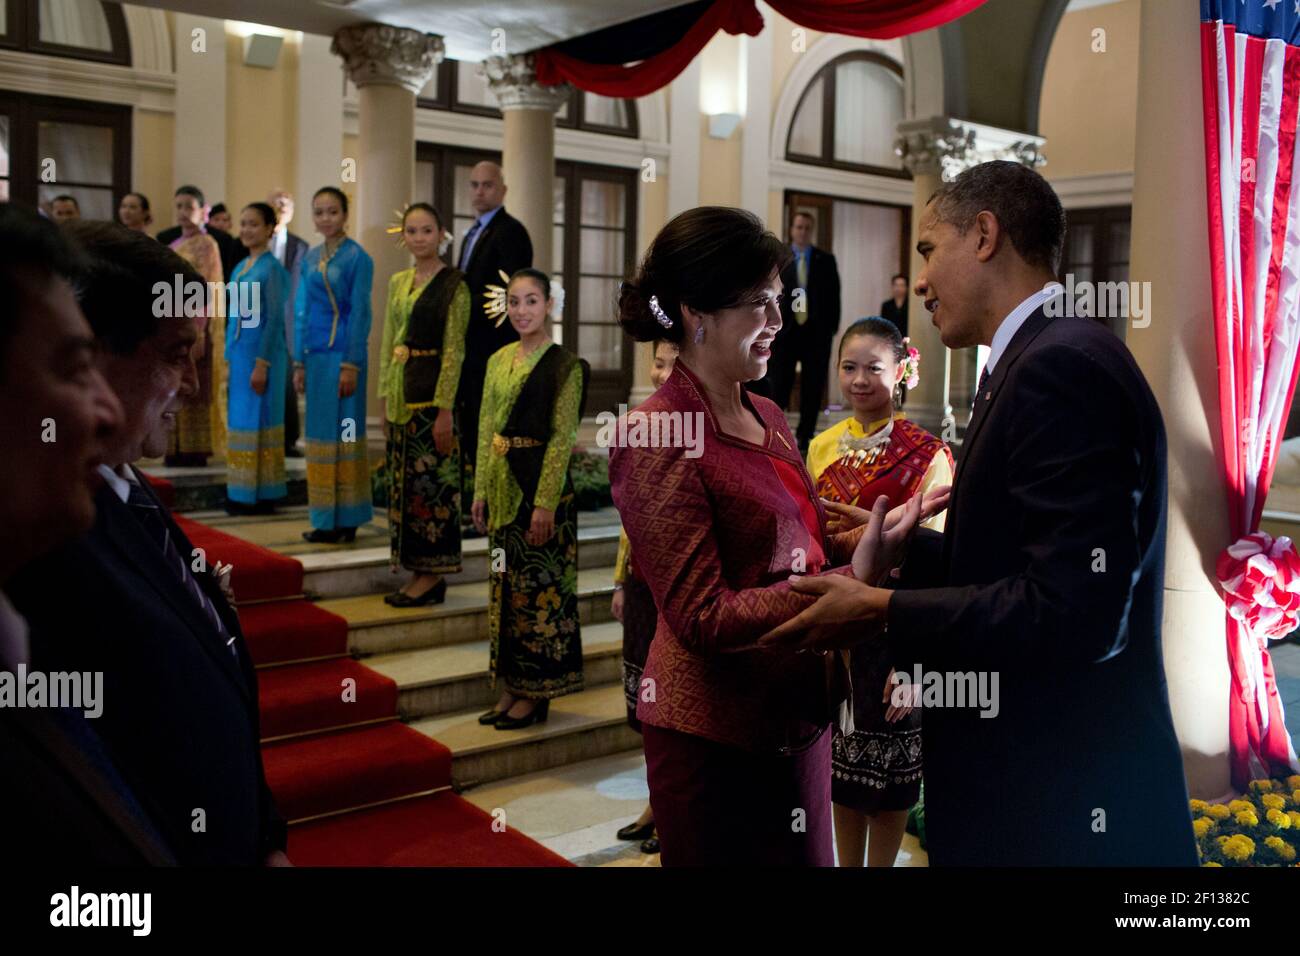 President Barack Obama talks with Thai Prime Minister Yingluck Shinawatra before departing the Government House in Bangkok Thailand Nov. 18 2012. Thai welcome performers line the stairs. Stock Photo